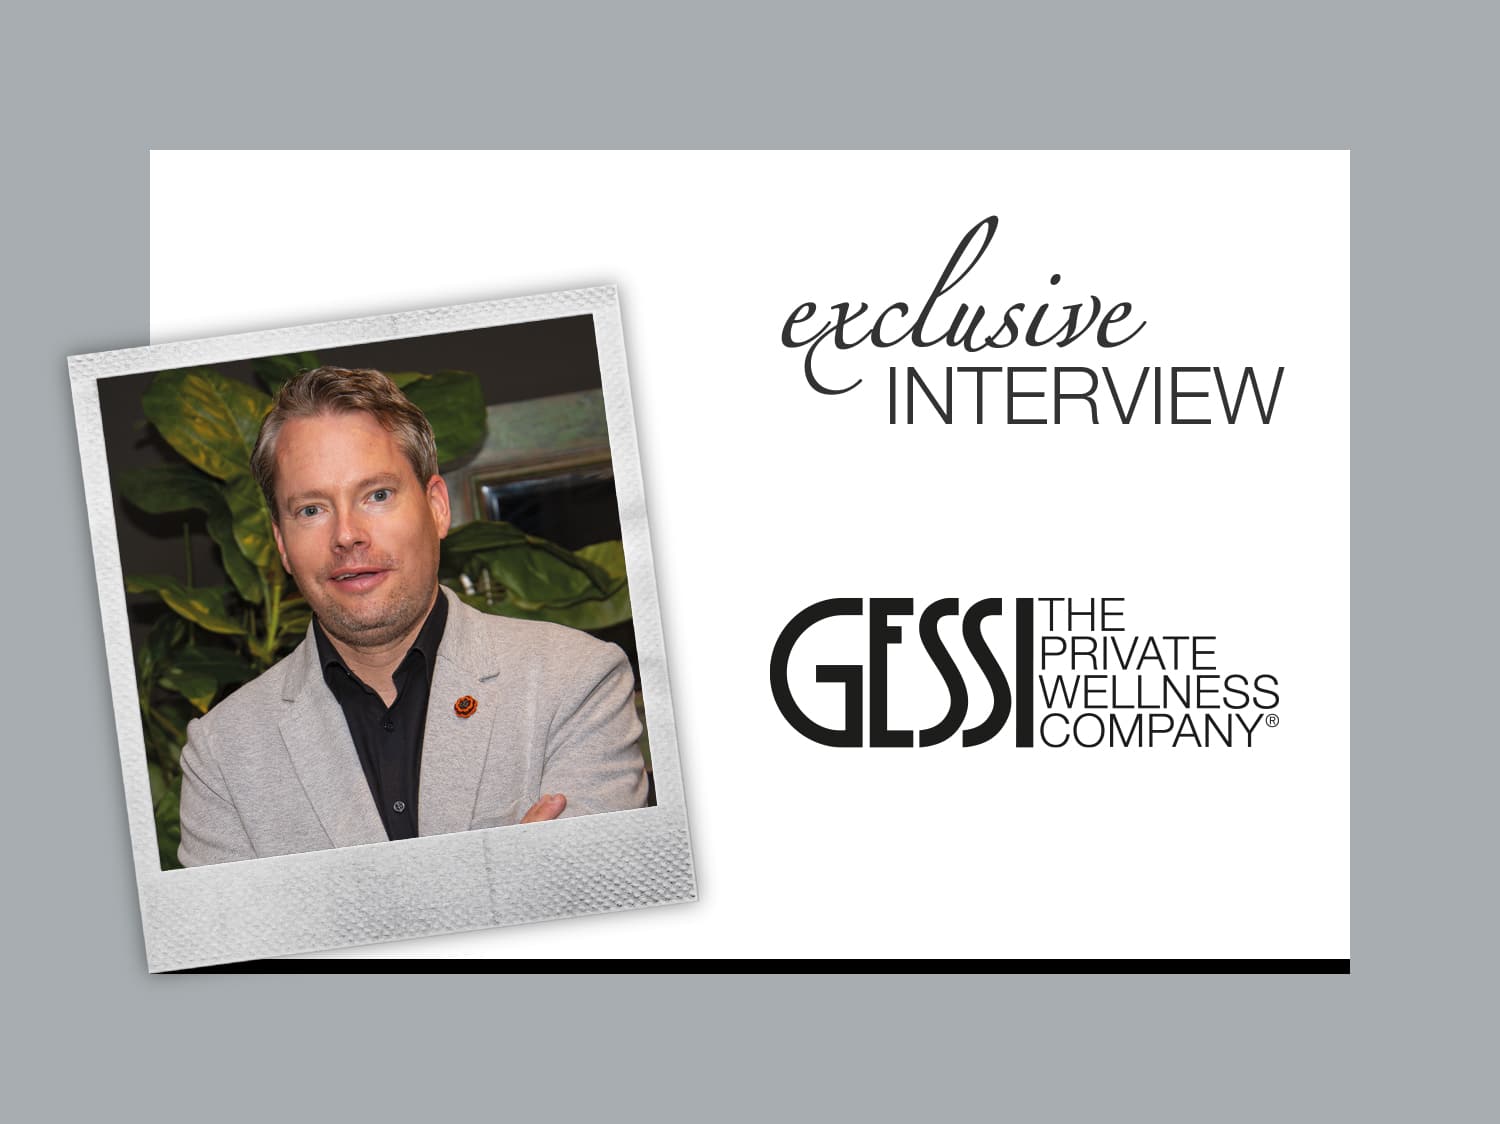 GESSI Germany GmbH Country Manager DE+AT, Alexander Wolf.